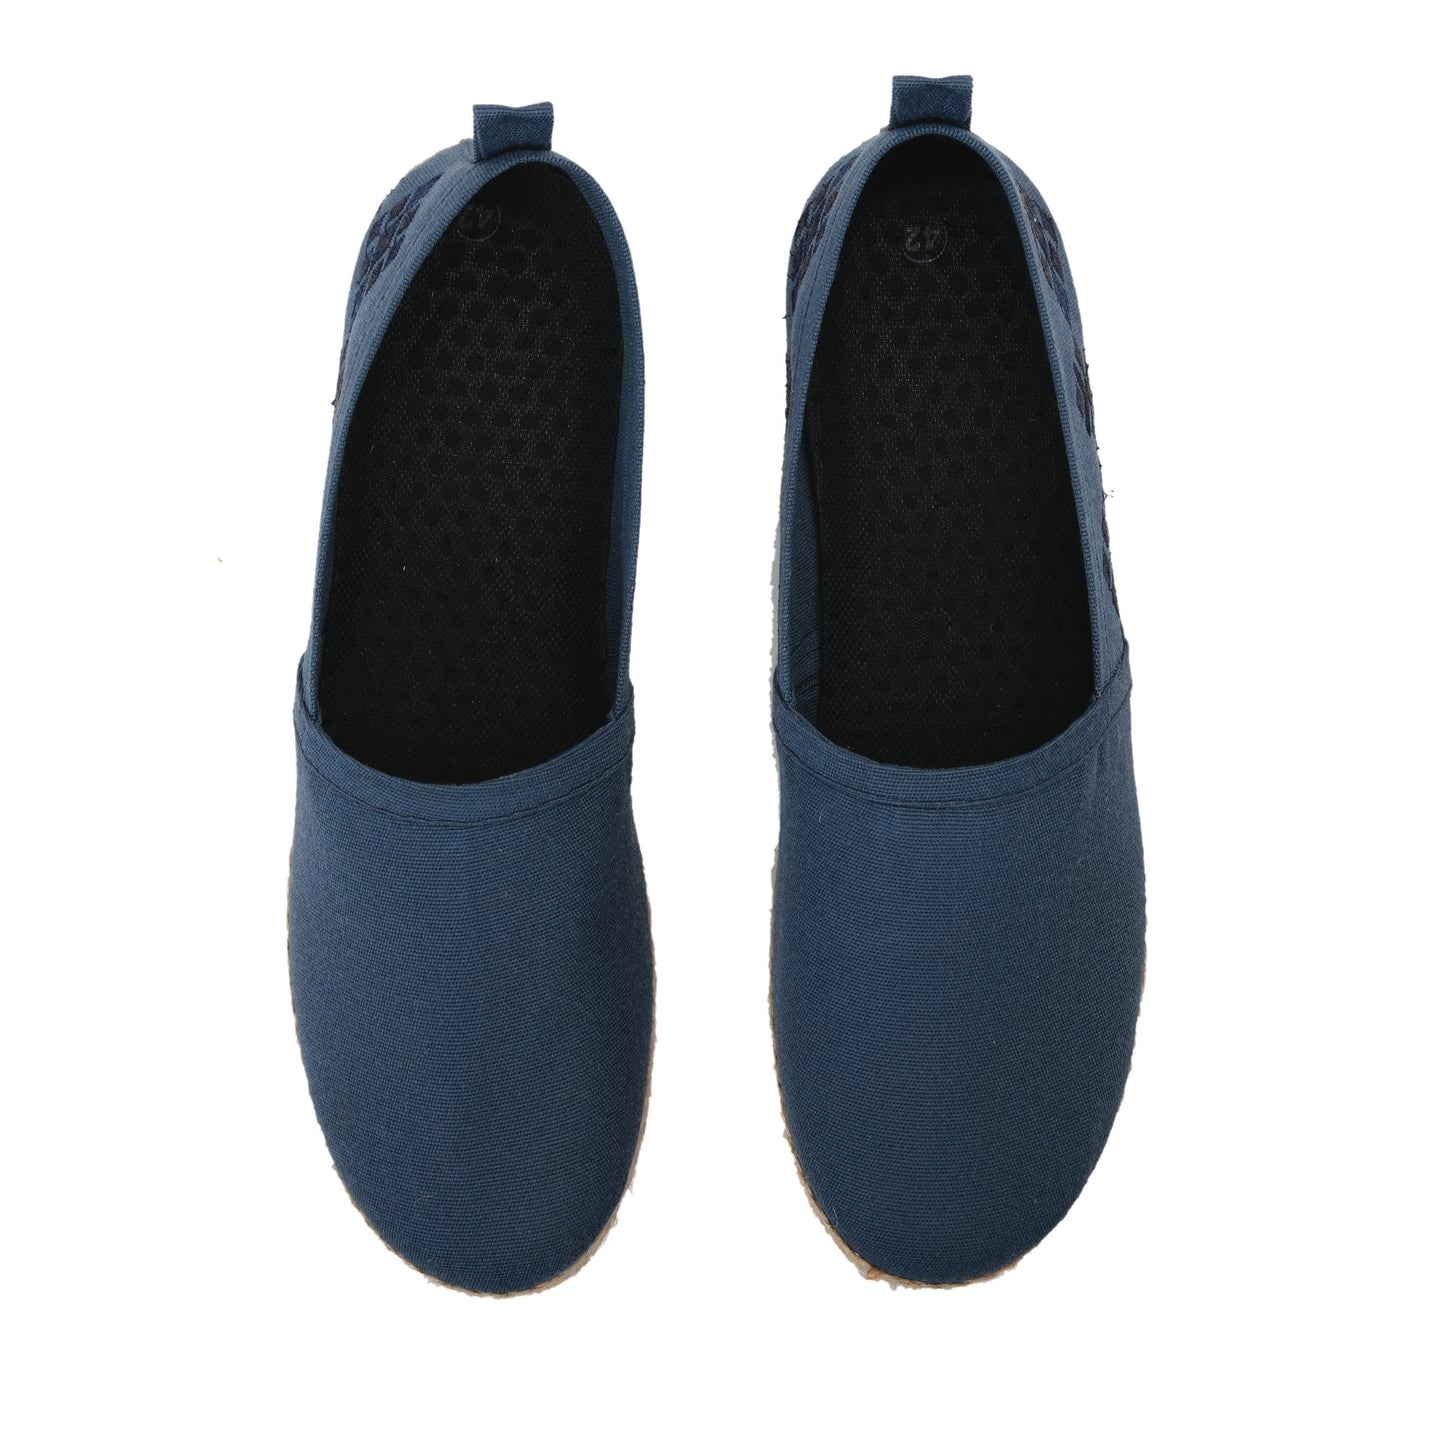 Navy men Espadrilles with navy embroideries -7005